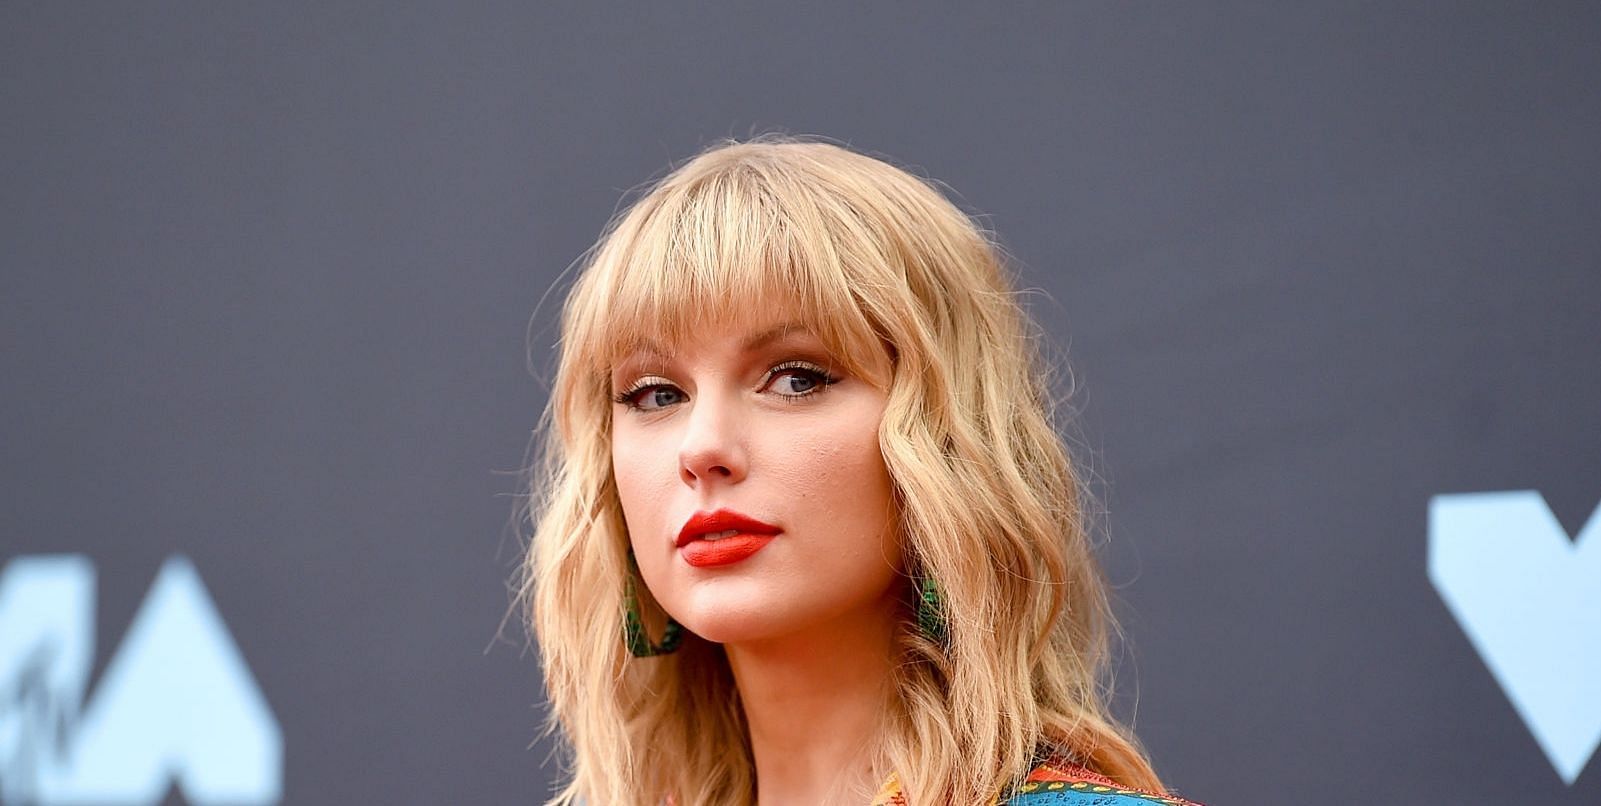 Taylor Swift and her fans called out Damon Albarn over songwriting controversy (Image via Getty Images)